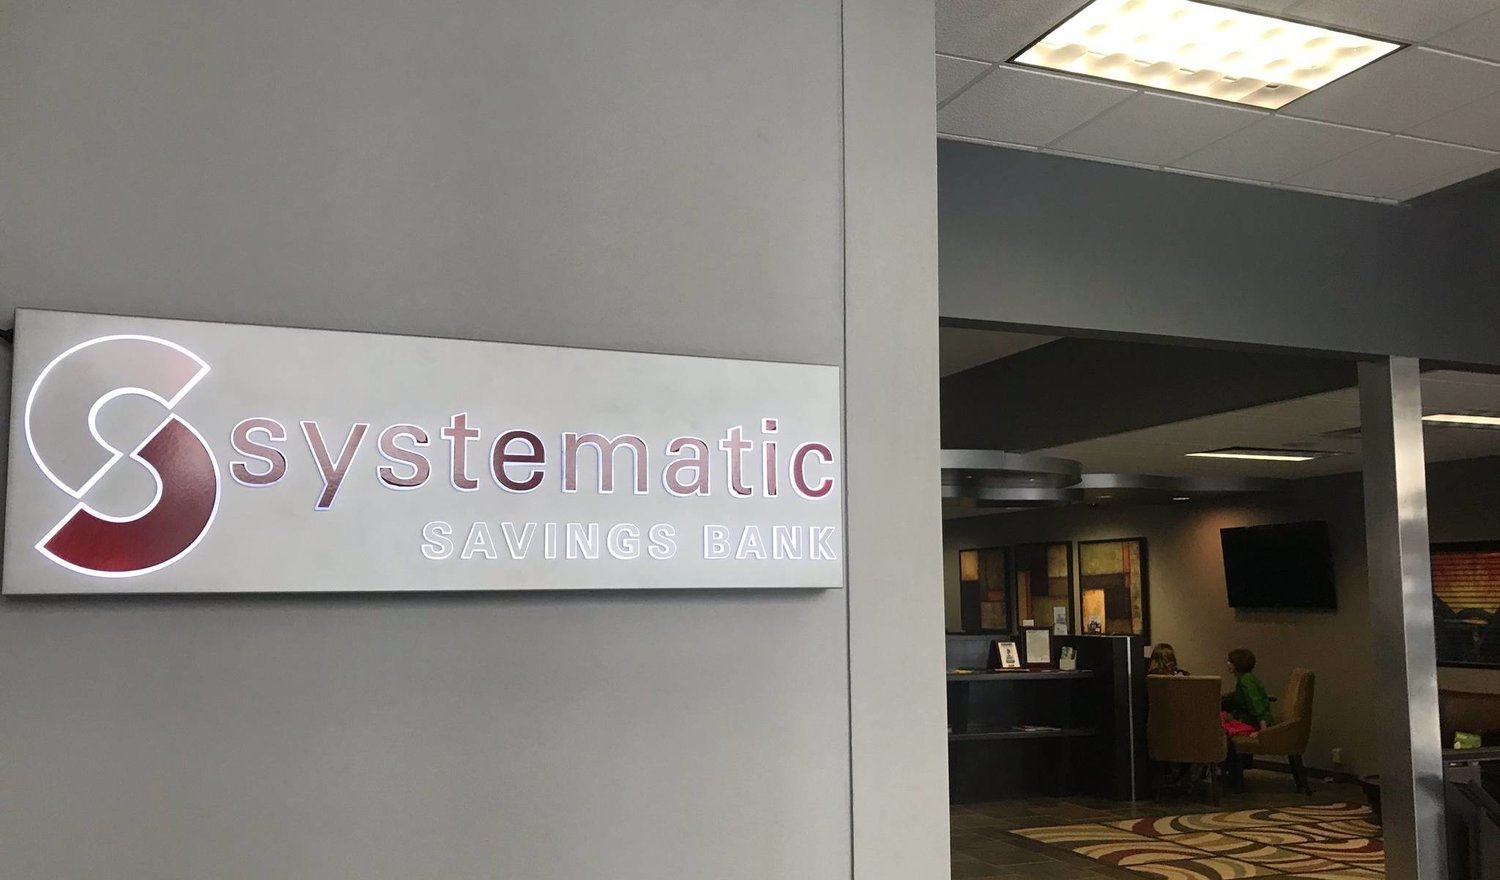 Systematic Savings Bank is committing $500,000 to mortgage loans in Restore SGF's program areas.